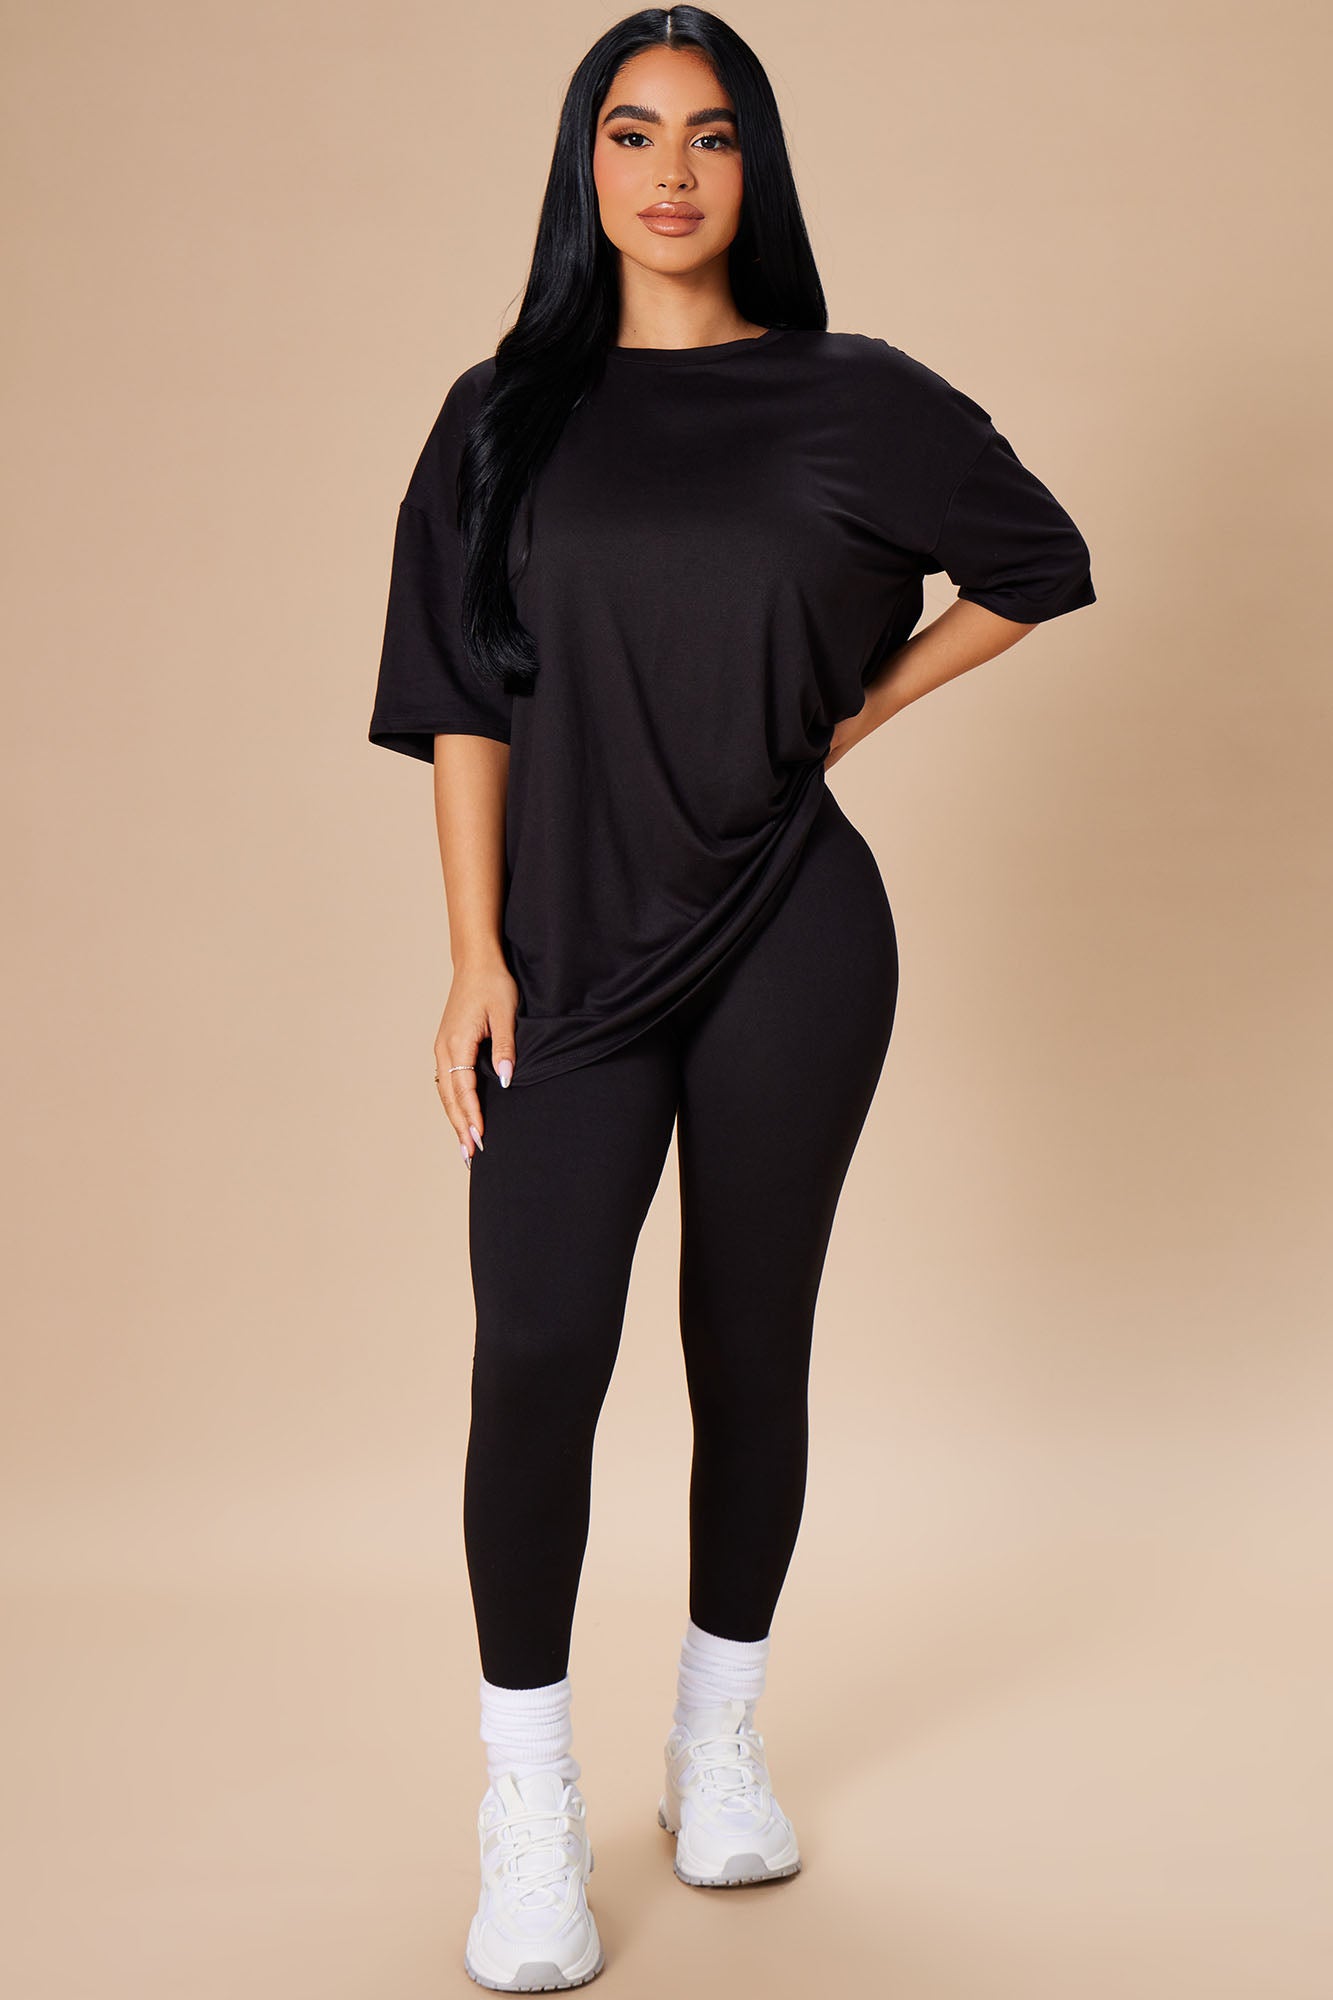 The Word Is Out Legging Set - Black/combo